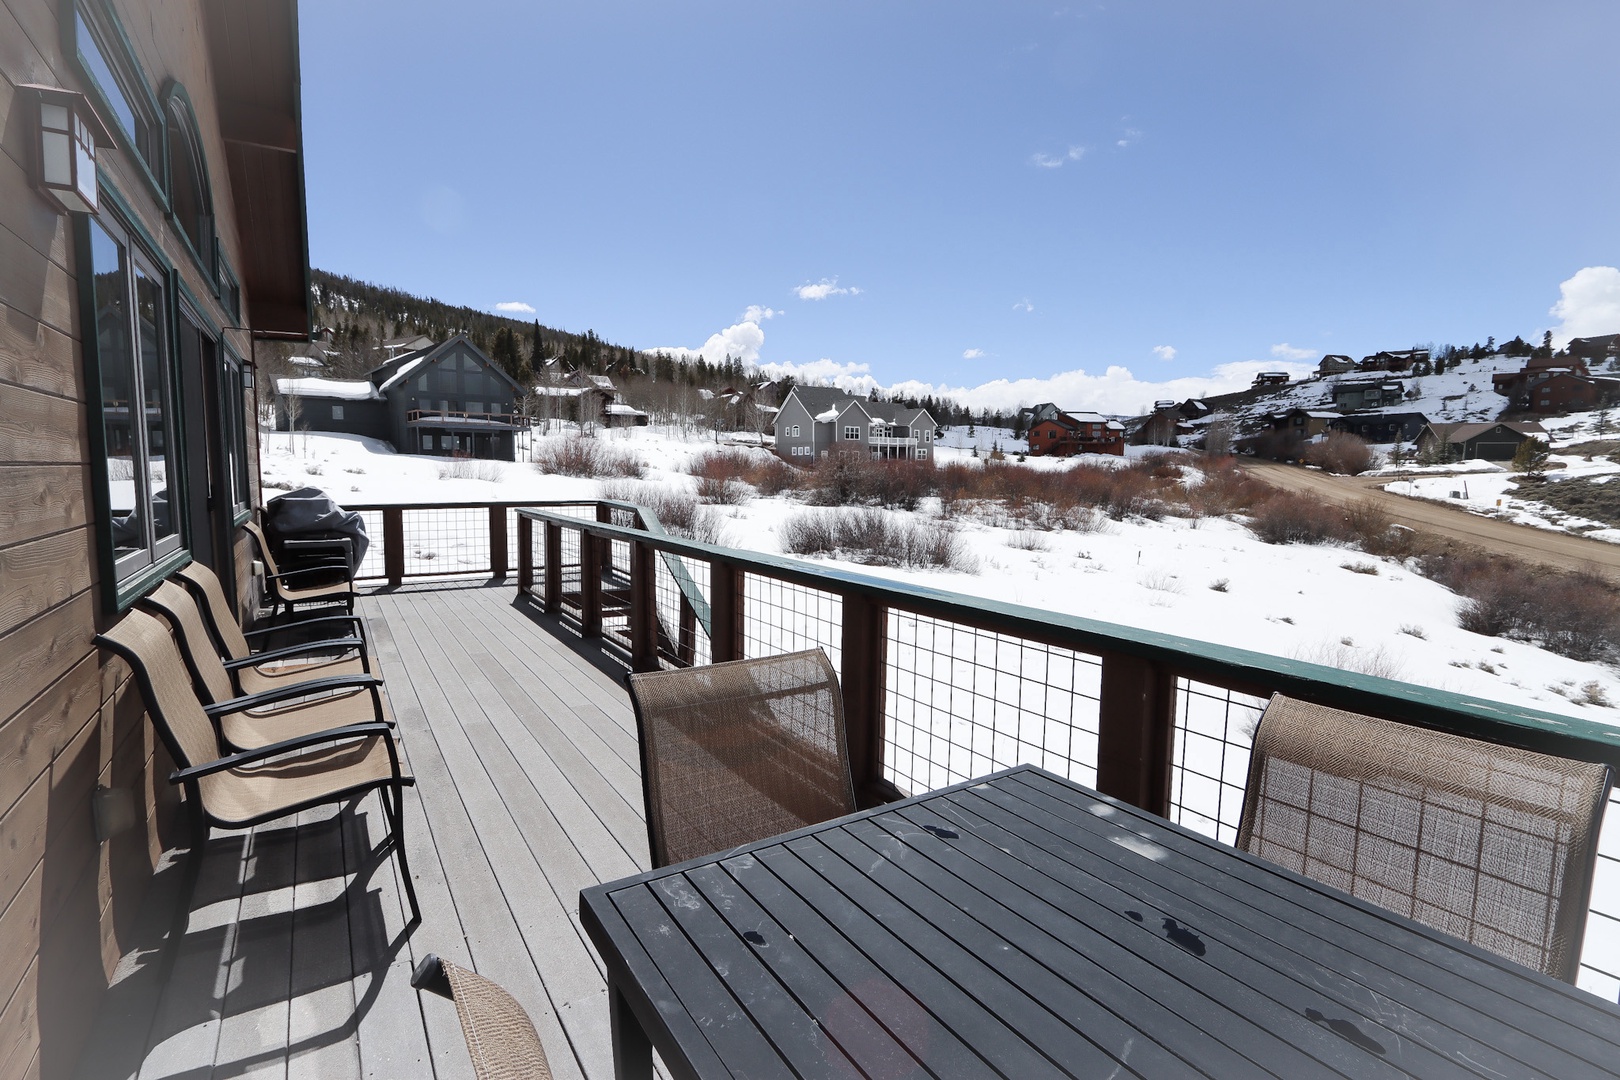 Relax and take in the crisp mountain air while enjoying the expansive views from the spacious deck